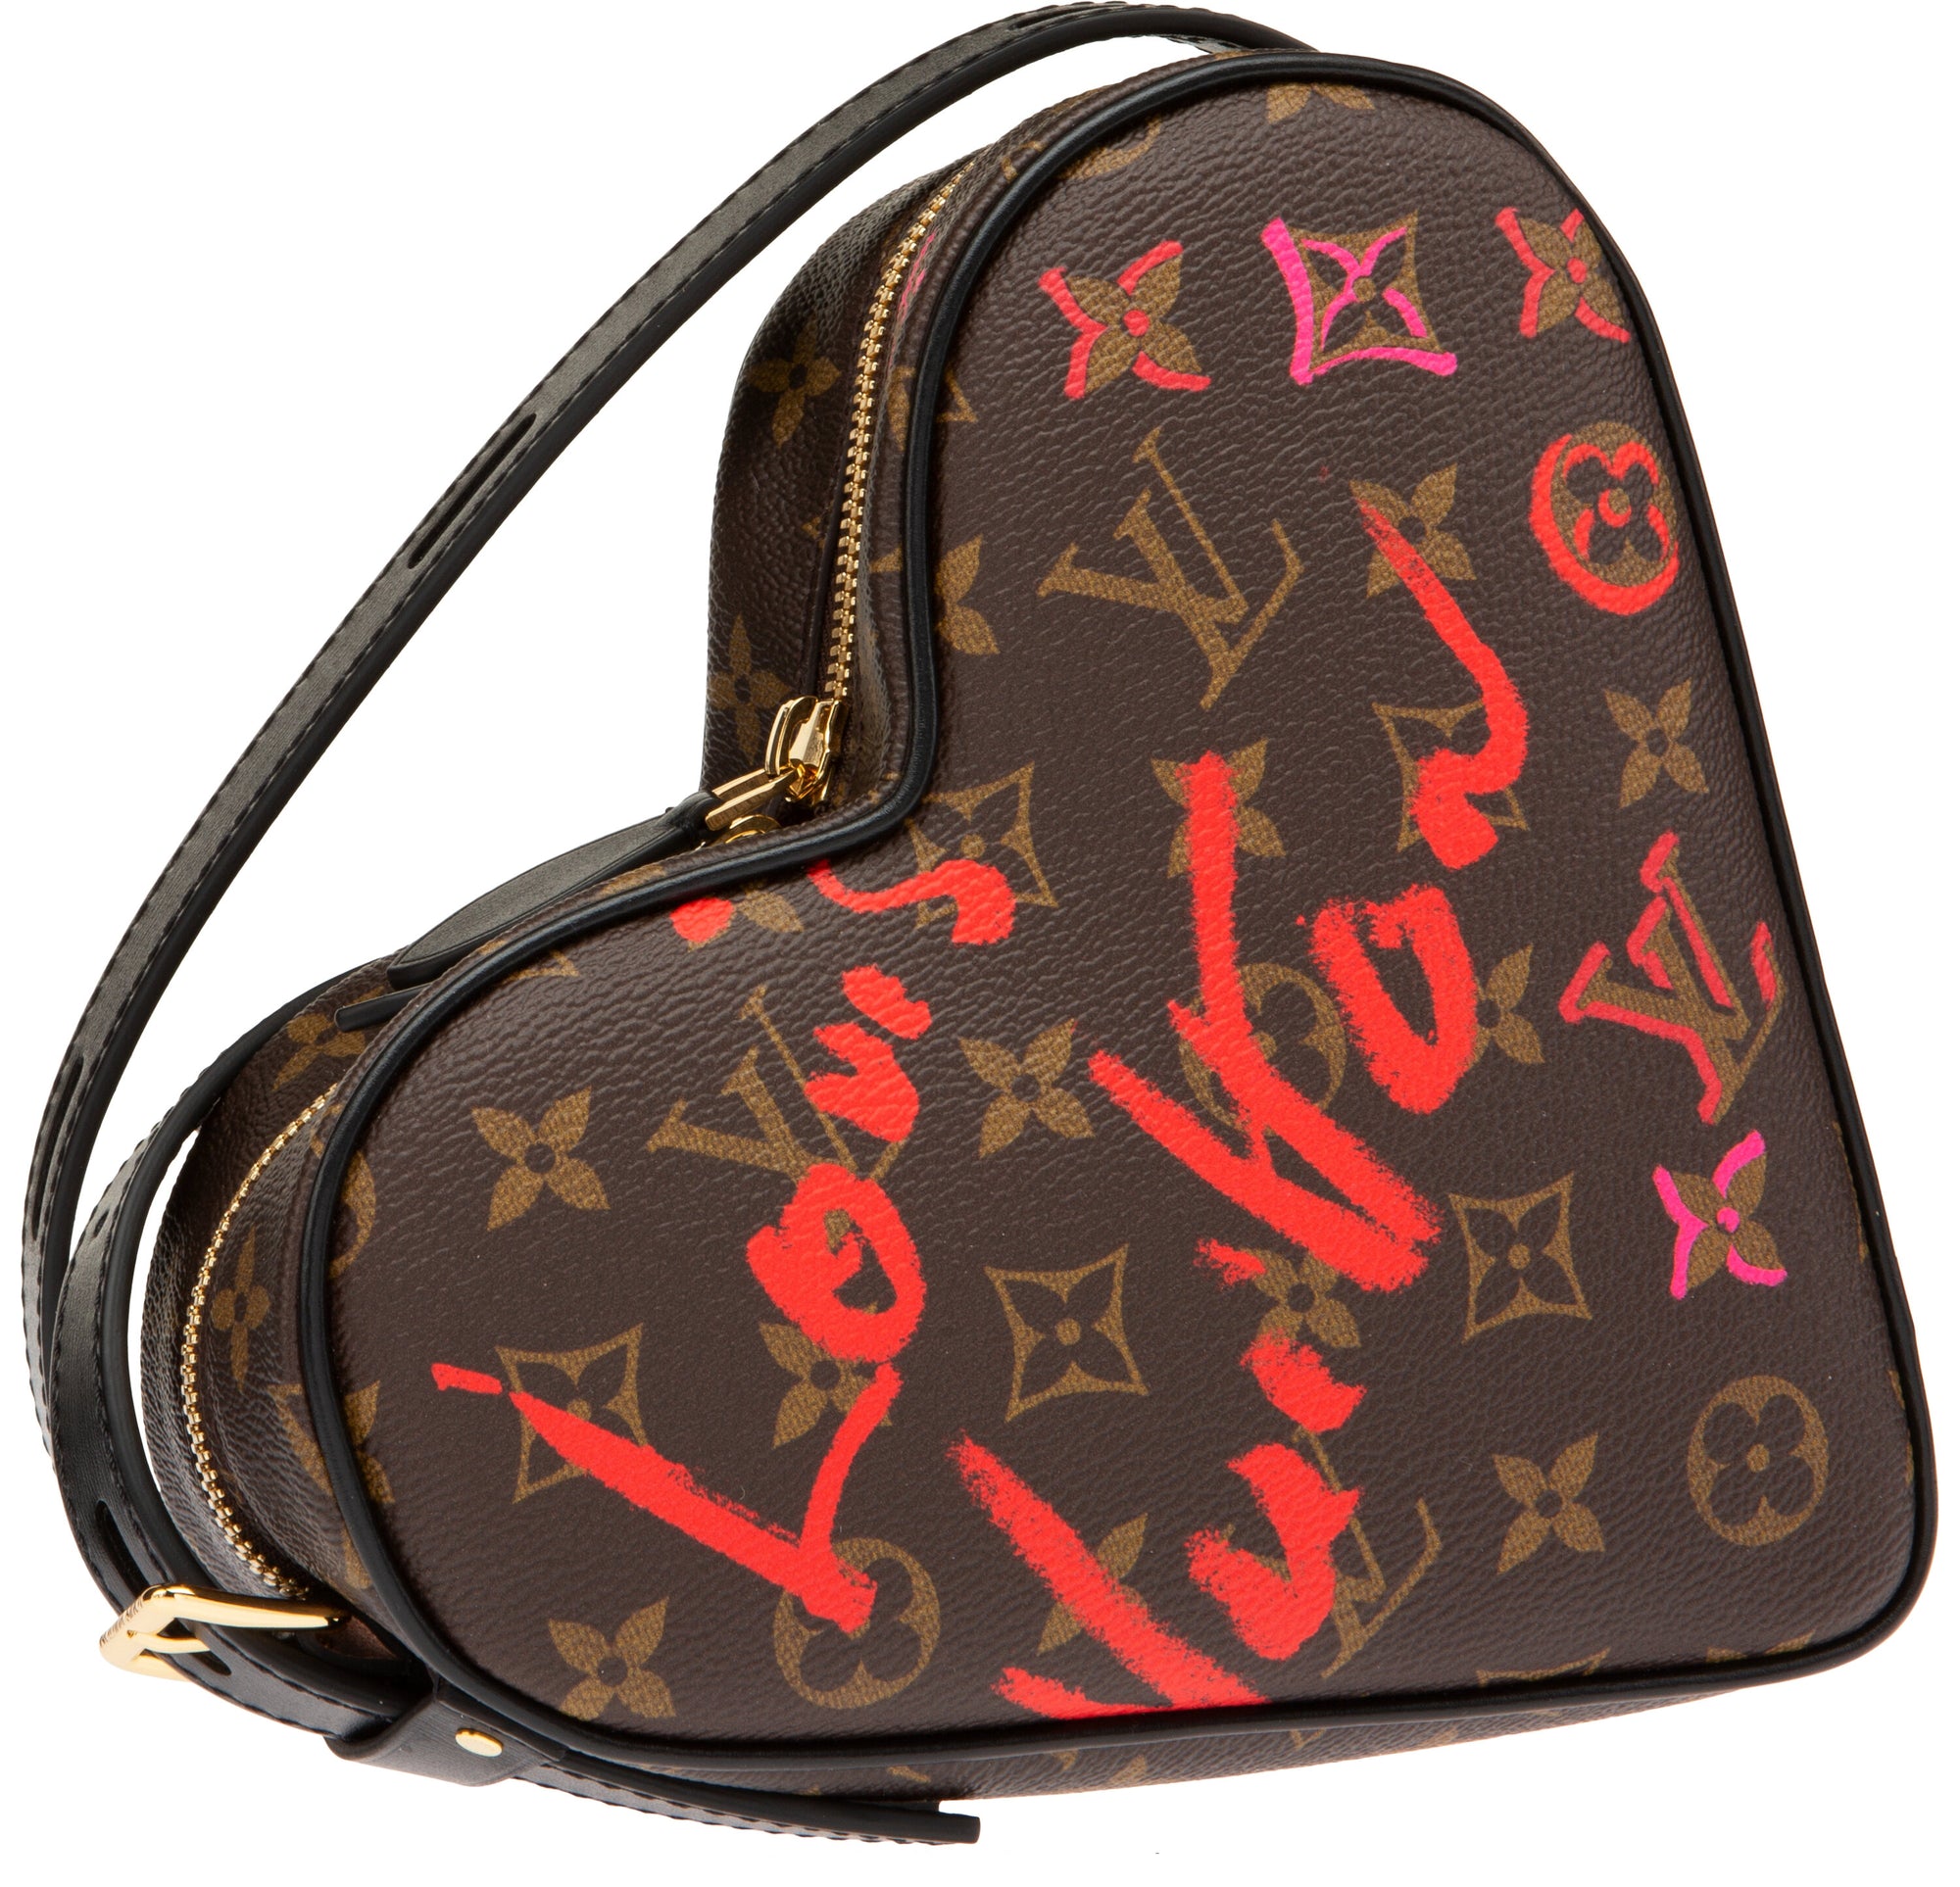 Louis Vuitton, exceptional ready-to-wear - Fashion & Leather Goods